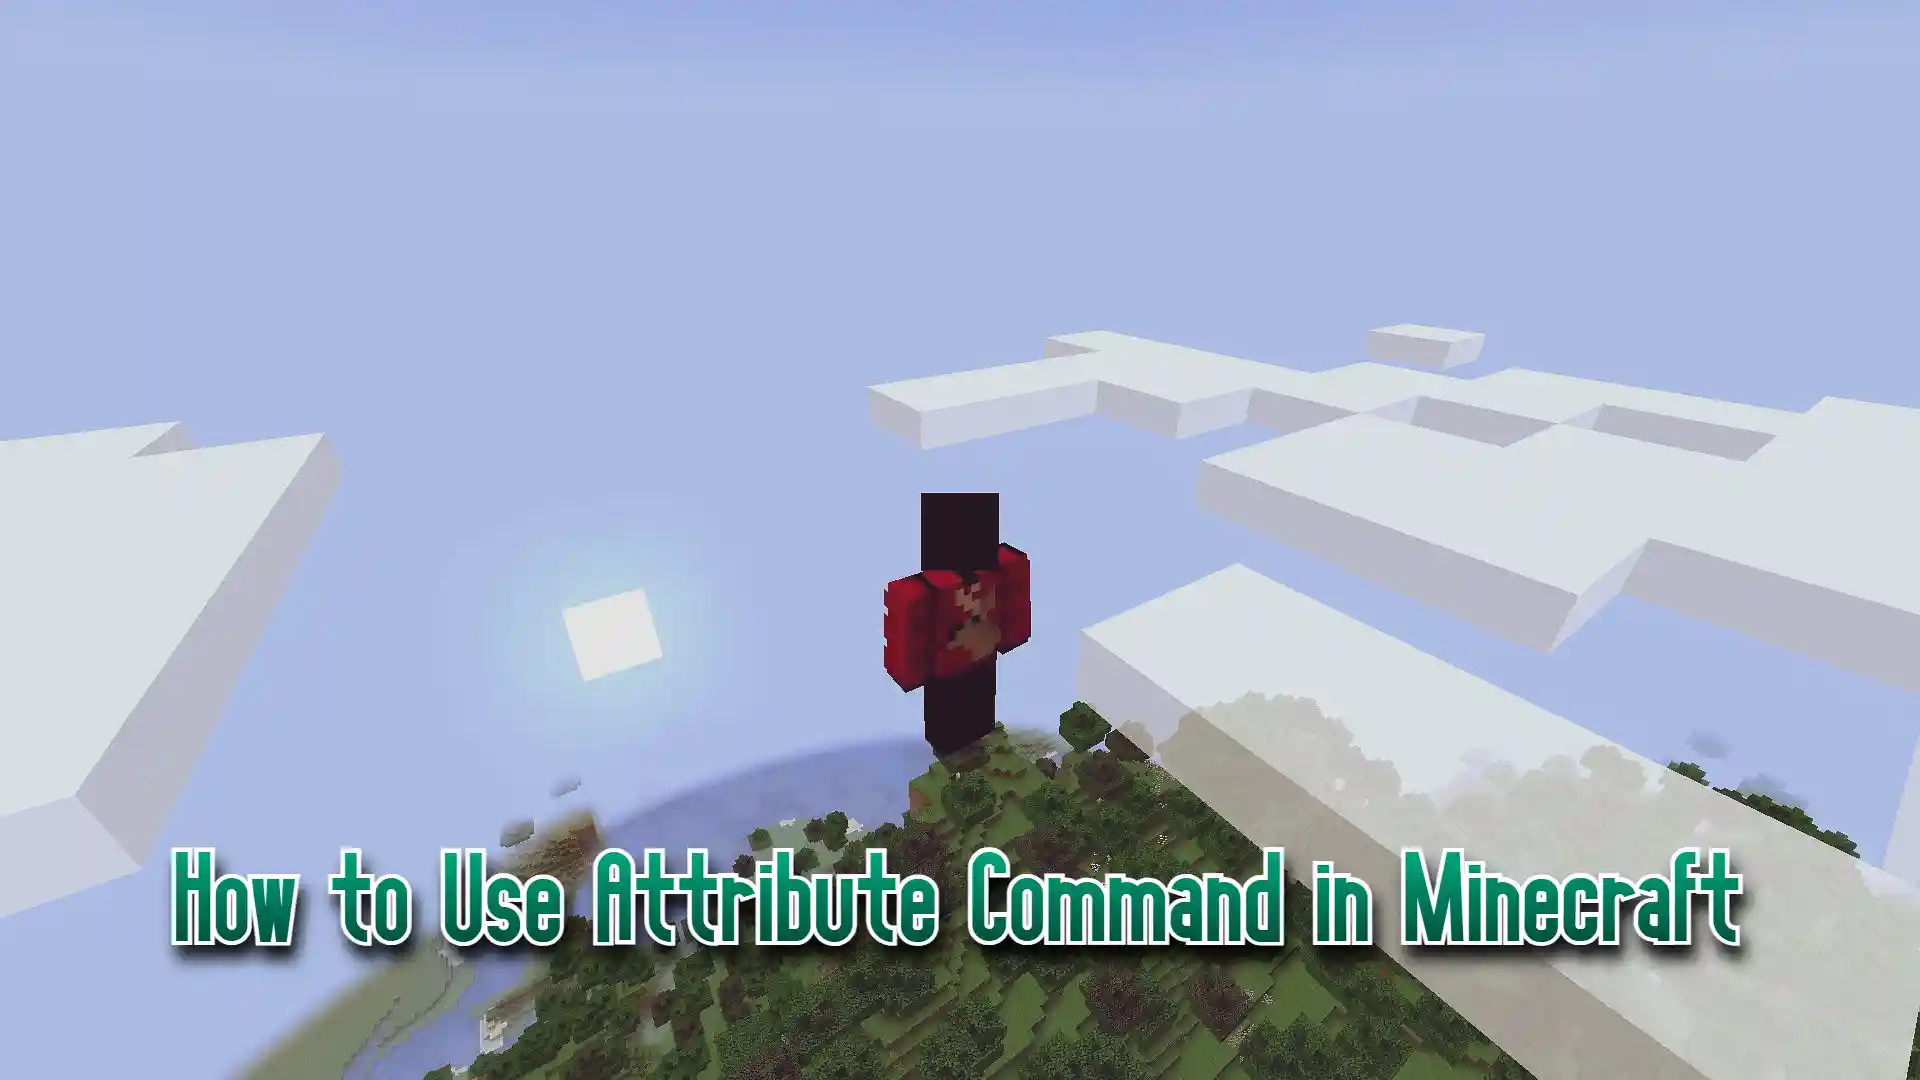 How to Use Attribute Command in Minecraft